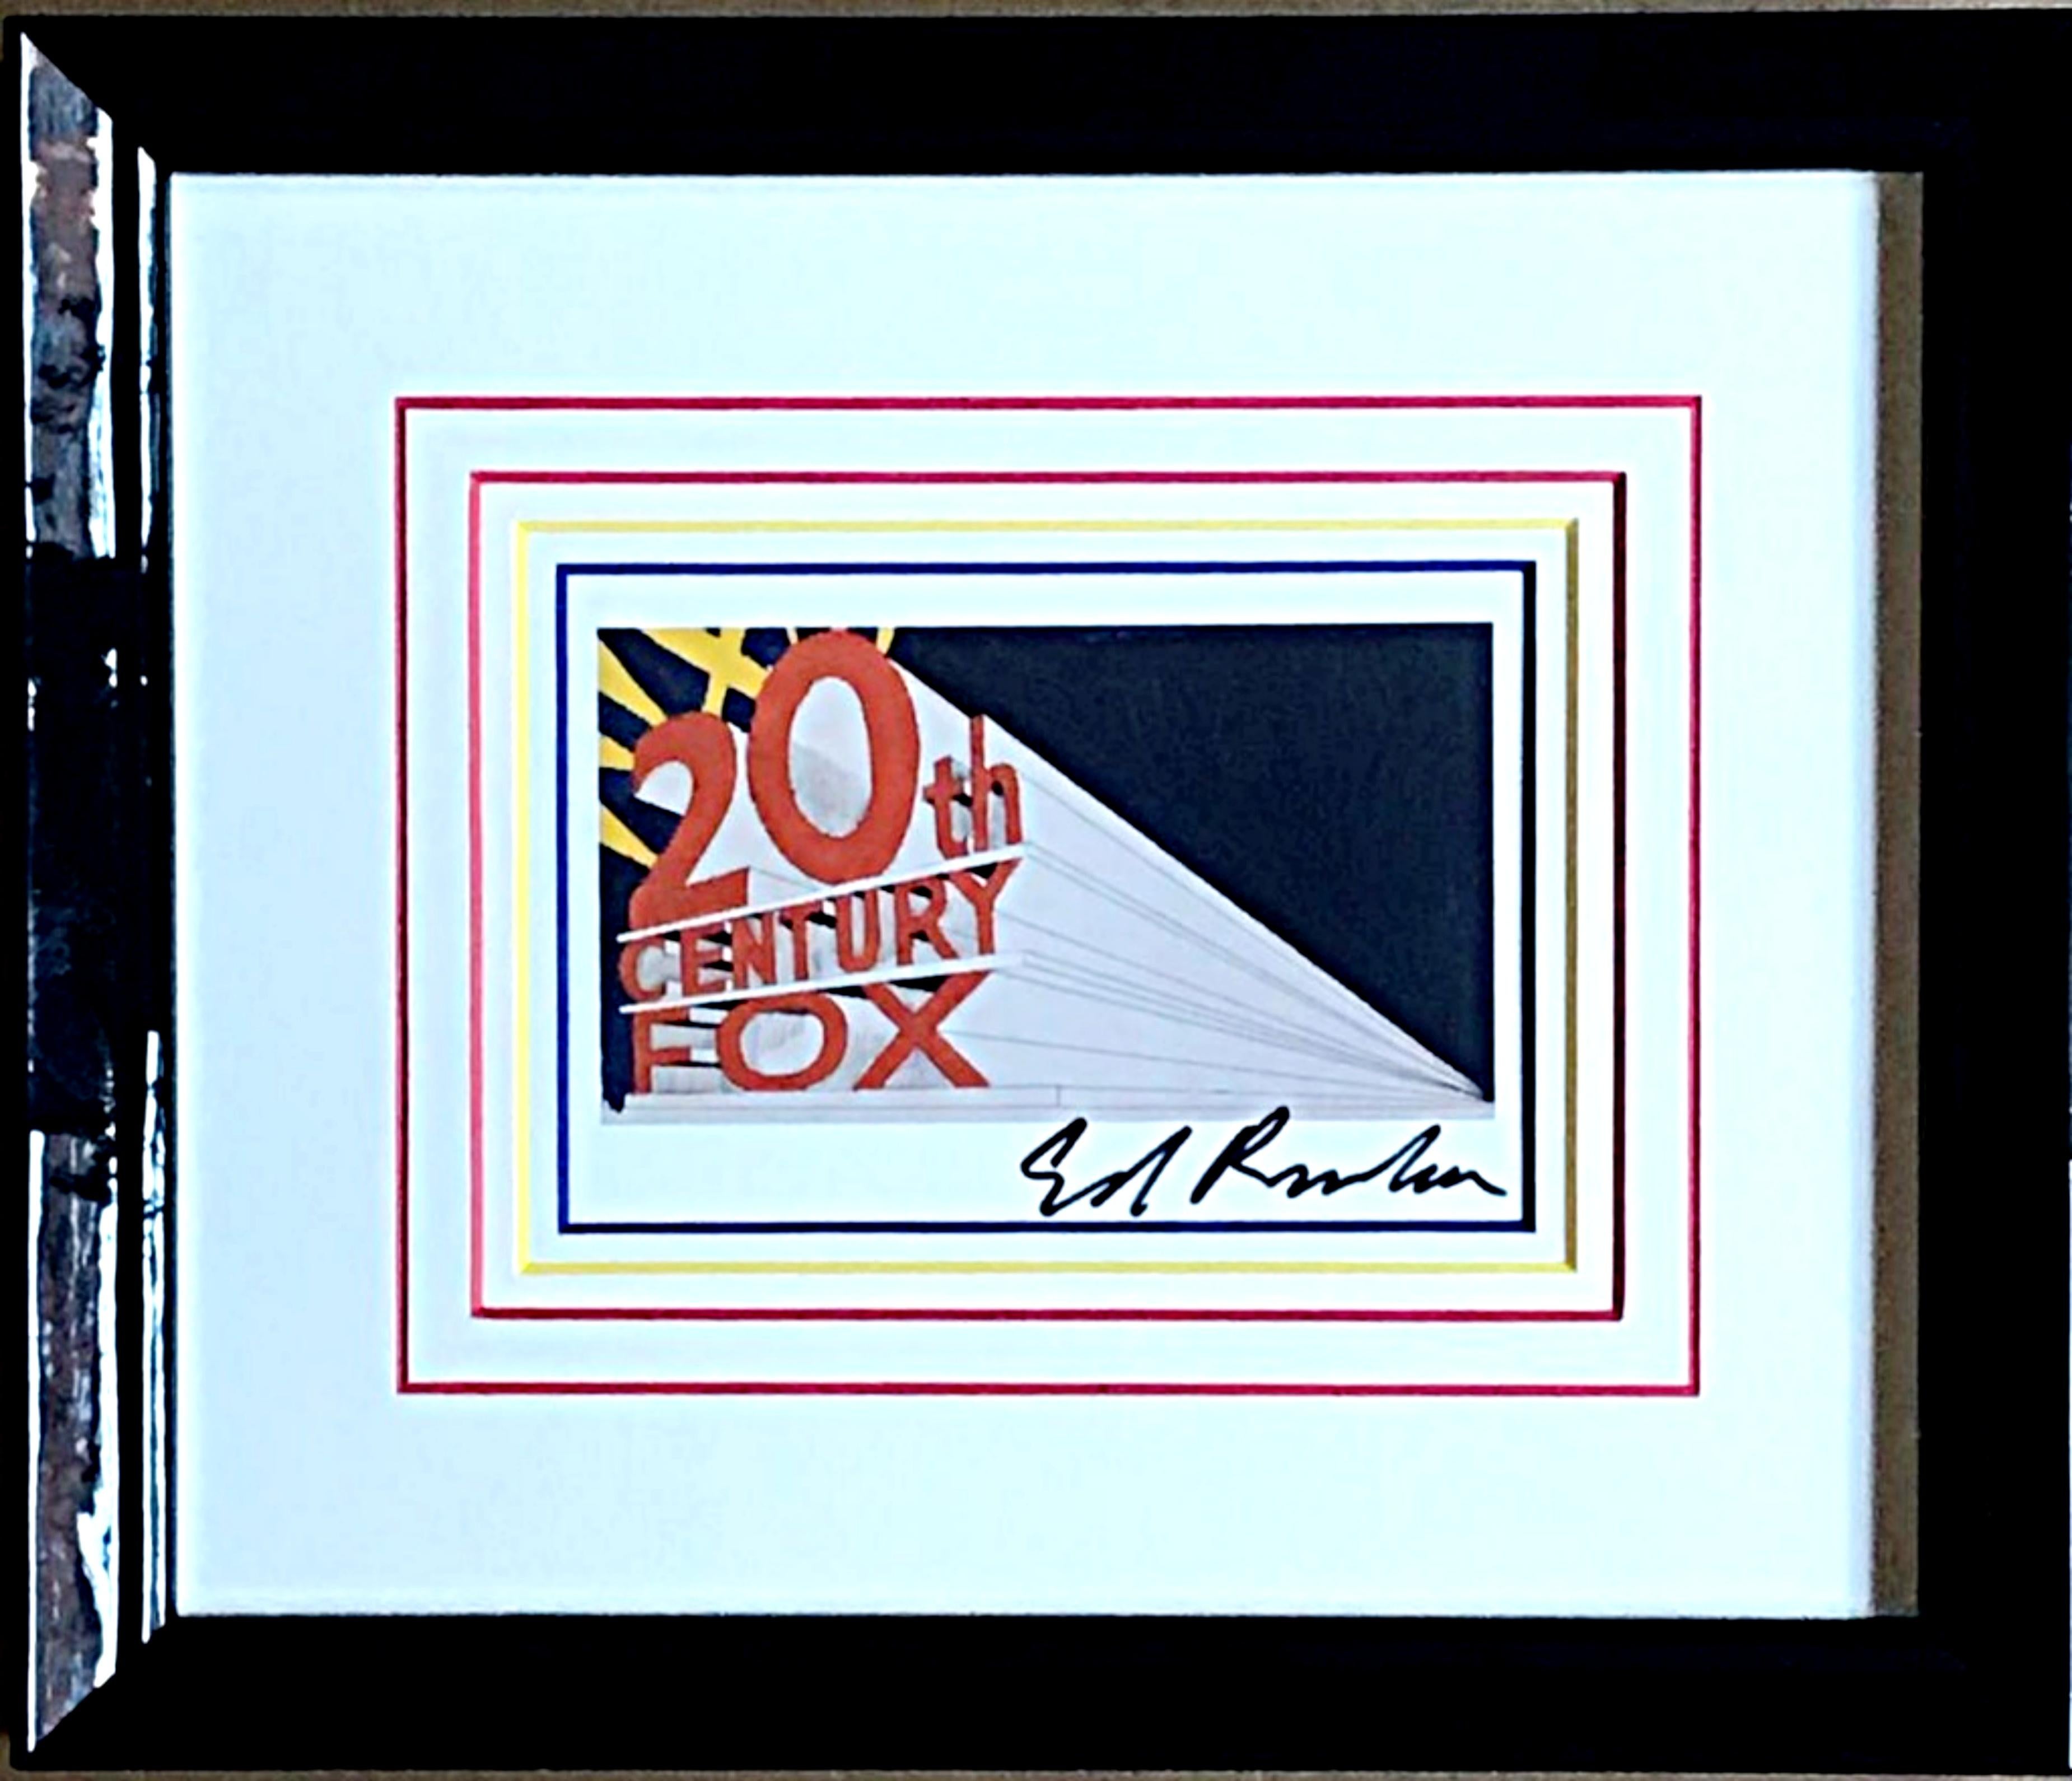 20th Century Fox (Hand Signed) offset lithograph card  - Print by Ed Ruscha